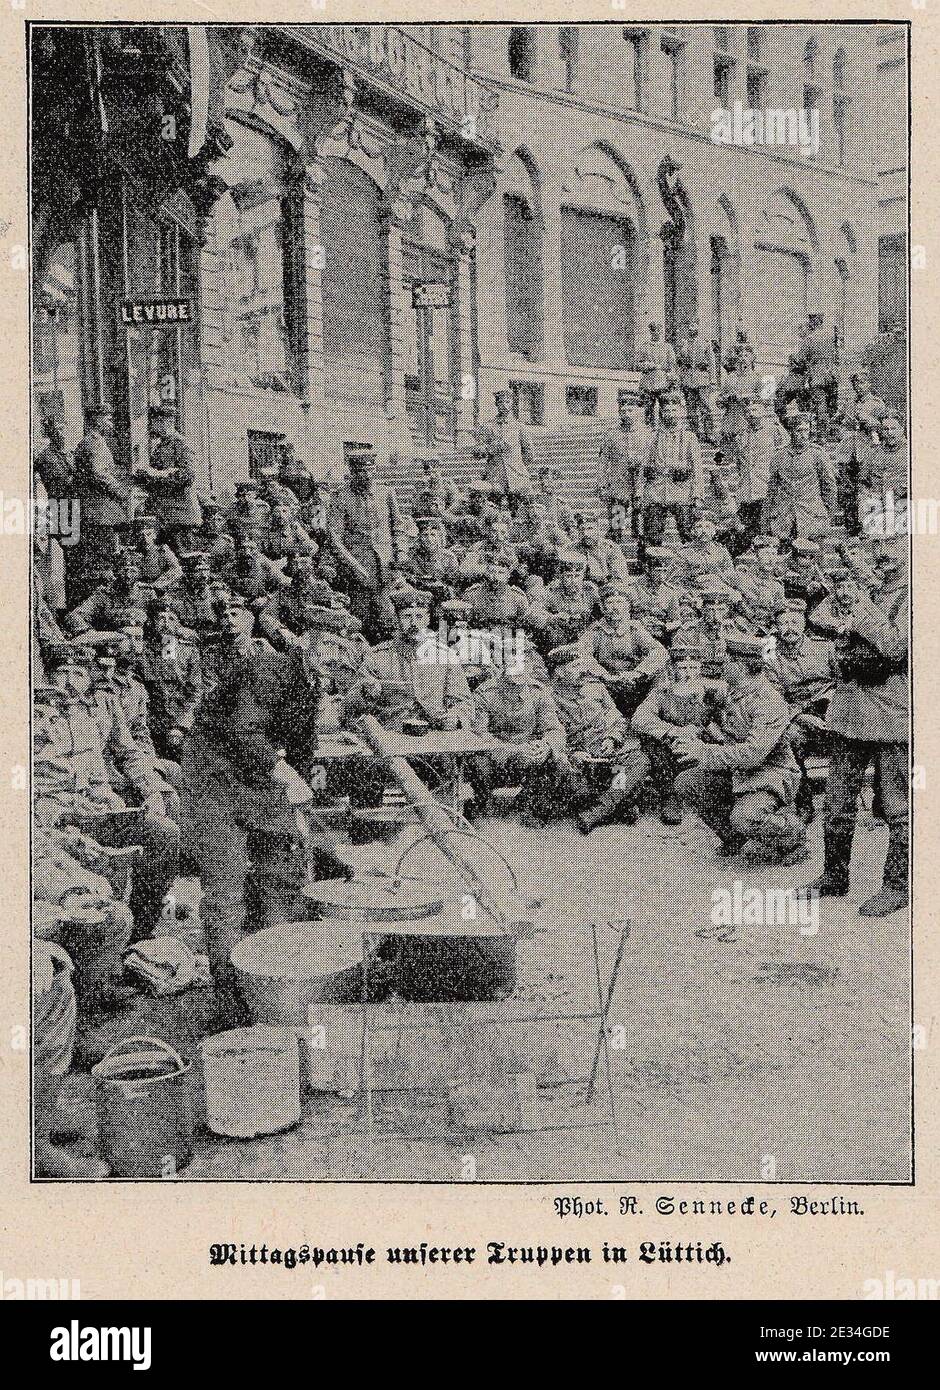 Lunchtime for German troops after the fall of Liège, August 1914. Stock Photo